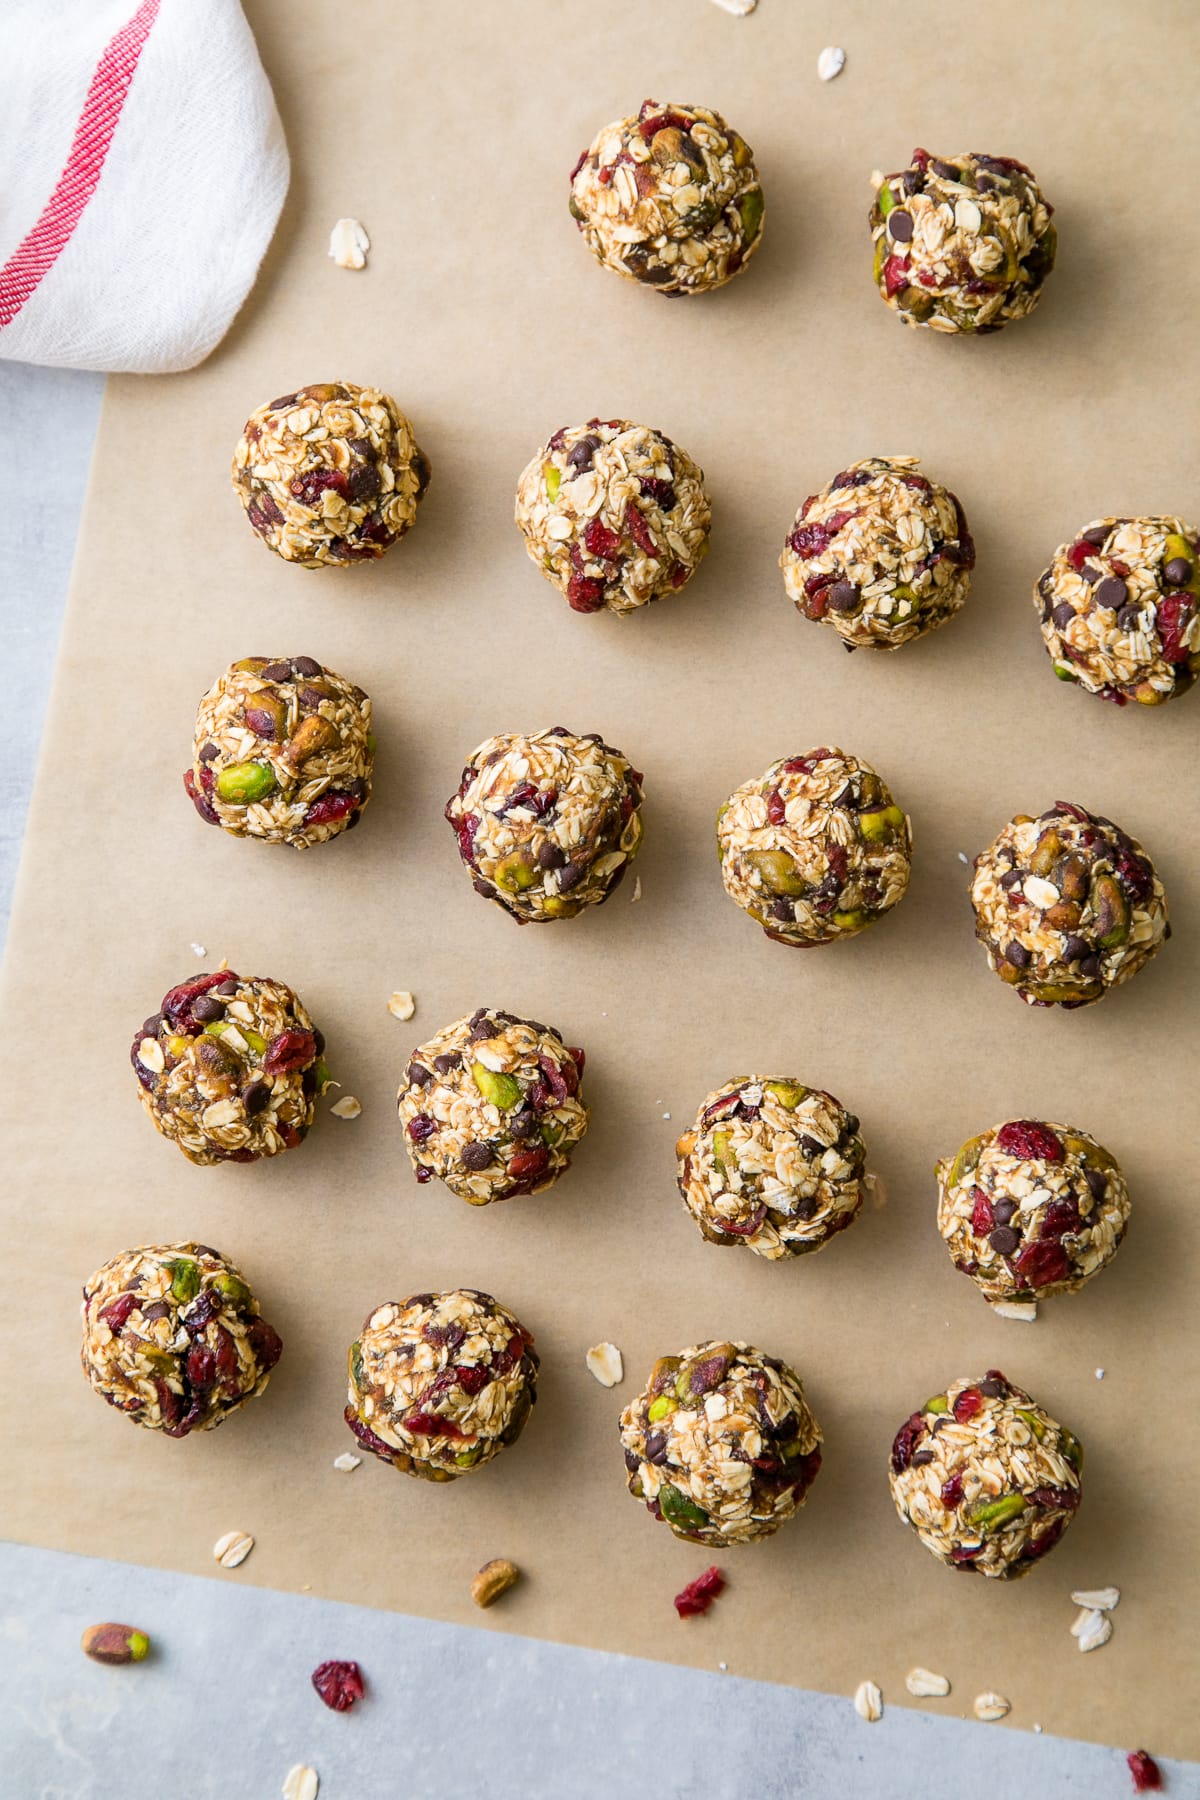 top down view of freshly rolled oatmeal energy bites with pistachios and cranberries.